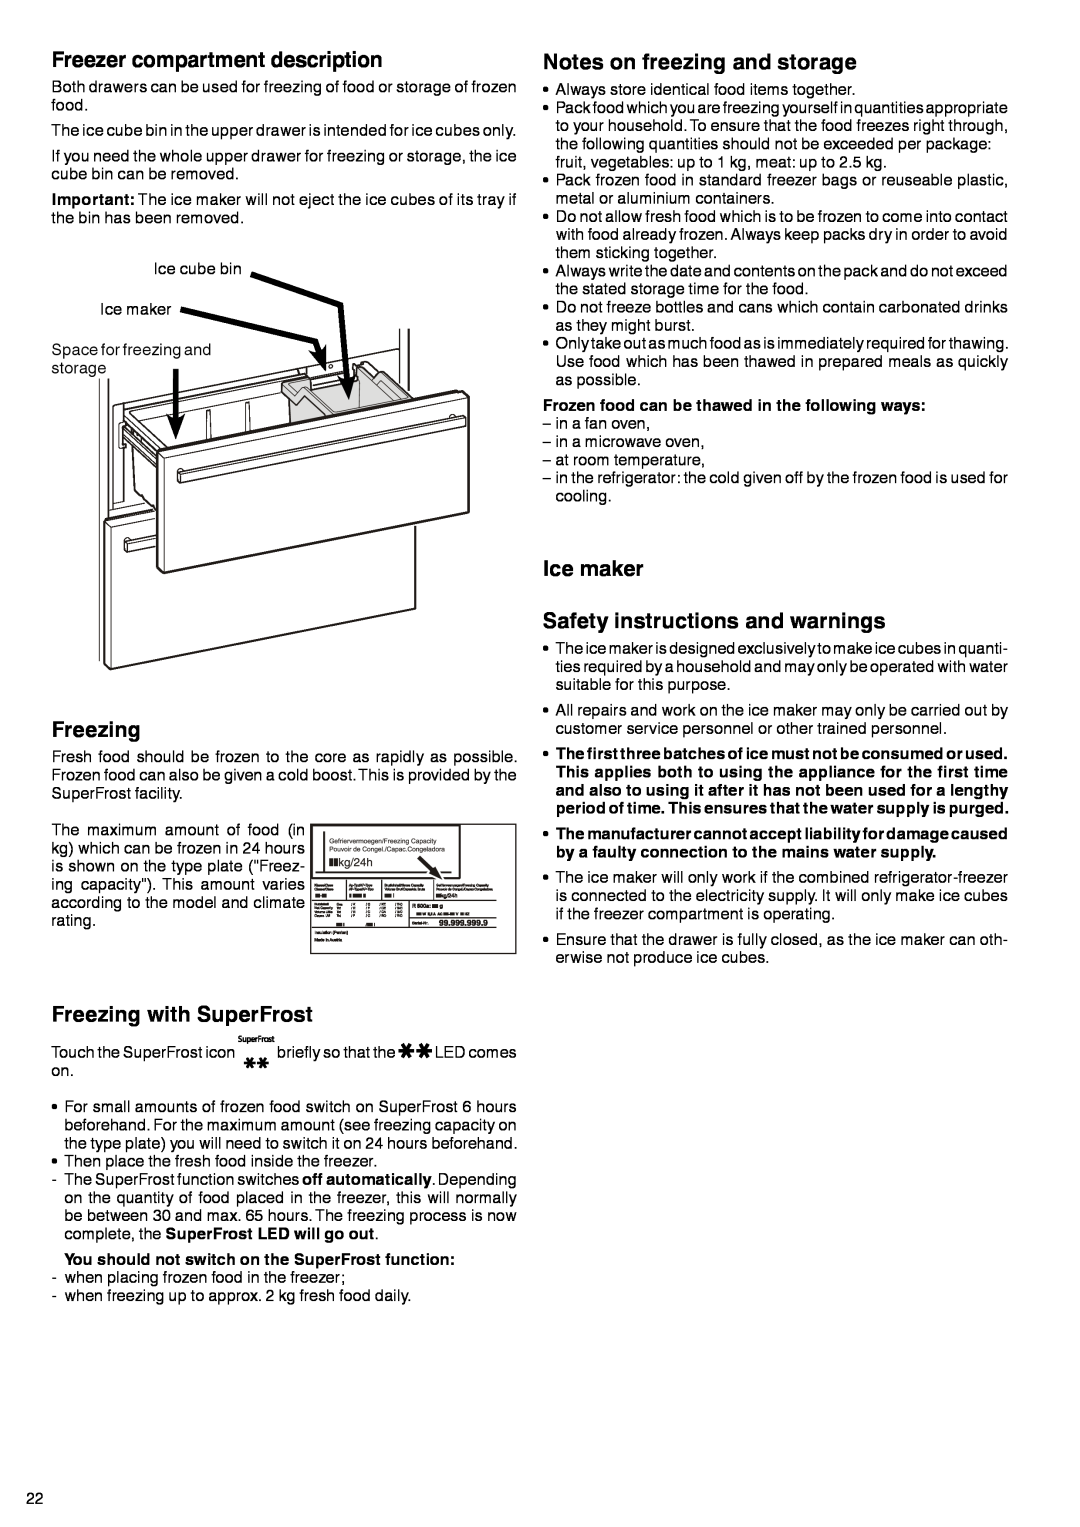 Liebherr 7082-499-00 manual Freezer compartment description, Notes on freezing and storage, Freezing with SuperFrost 